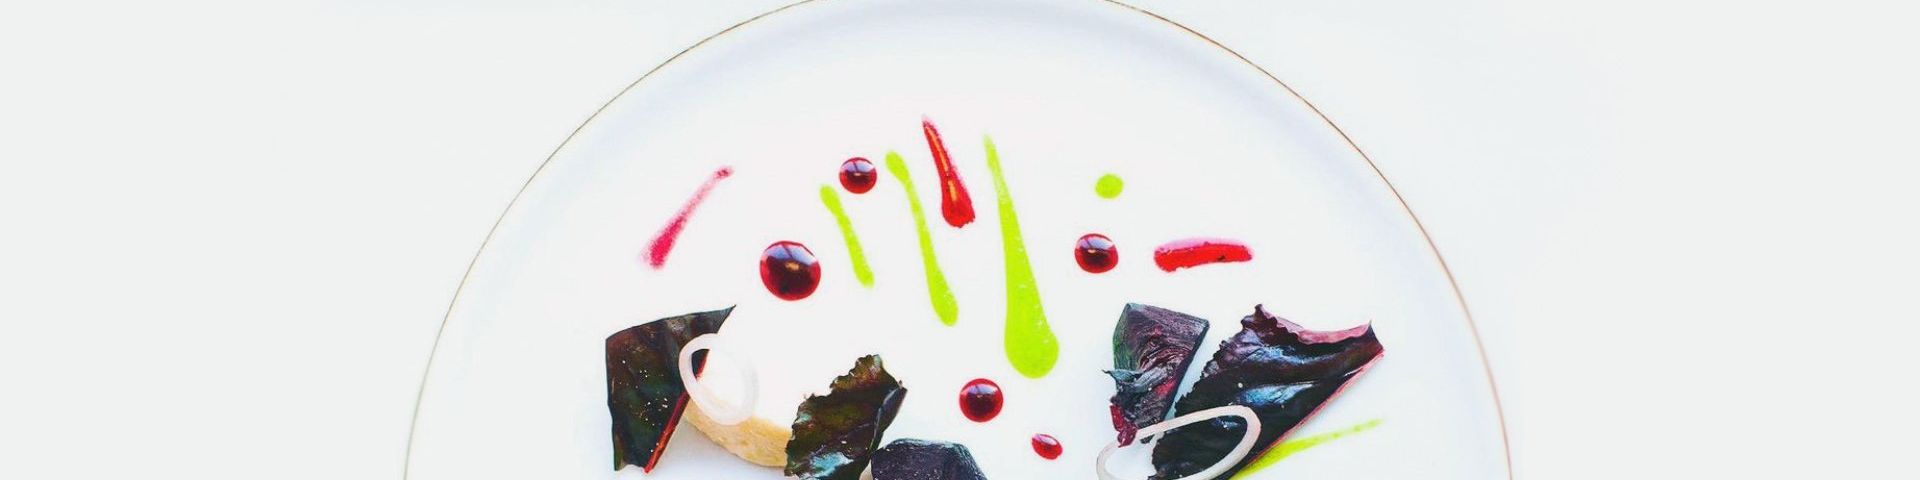 A red chard, beetroot, plant ricotta and parsley dish. Only the top half of the gold-trimmed white plate is shown and sits as a semicircle in the middle of the photo. The sauces of the dish are spotted and striped on the plate in bright pinks and vivid lime green.